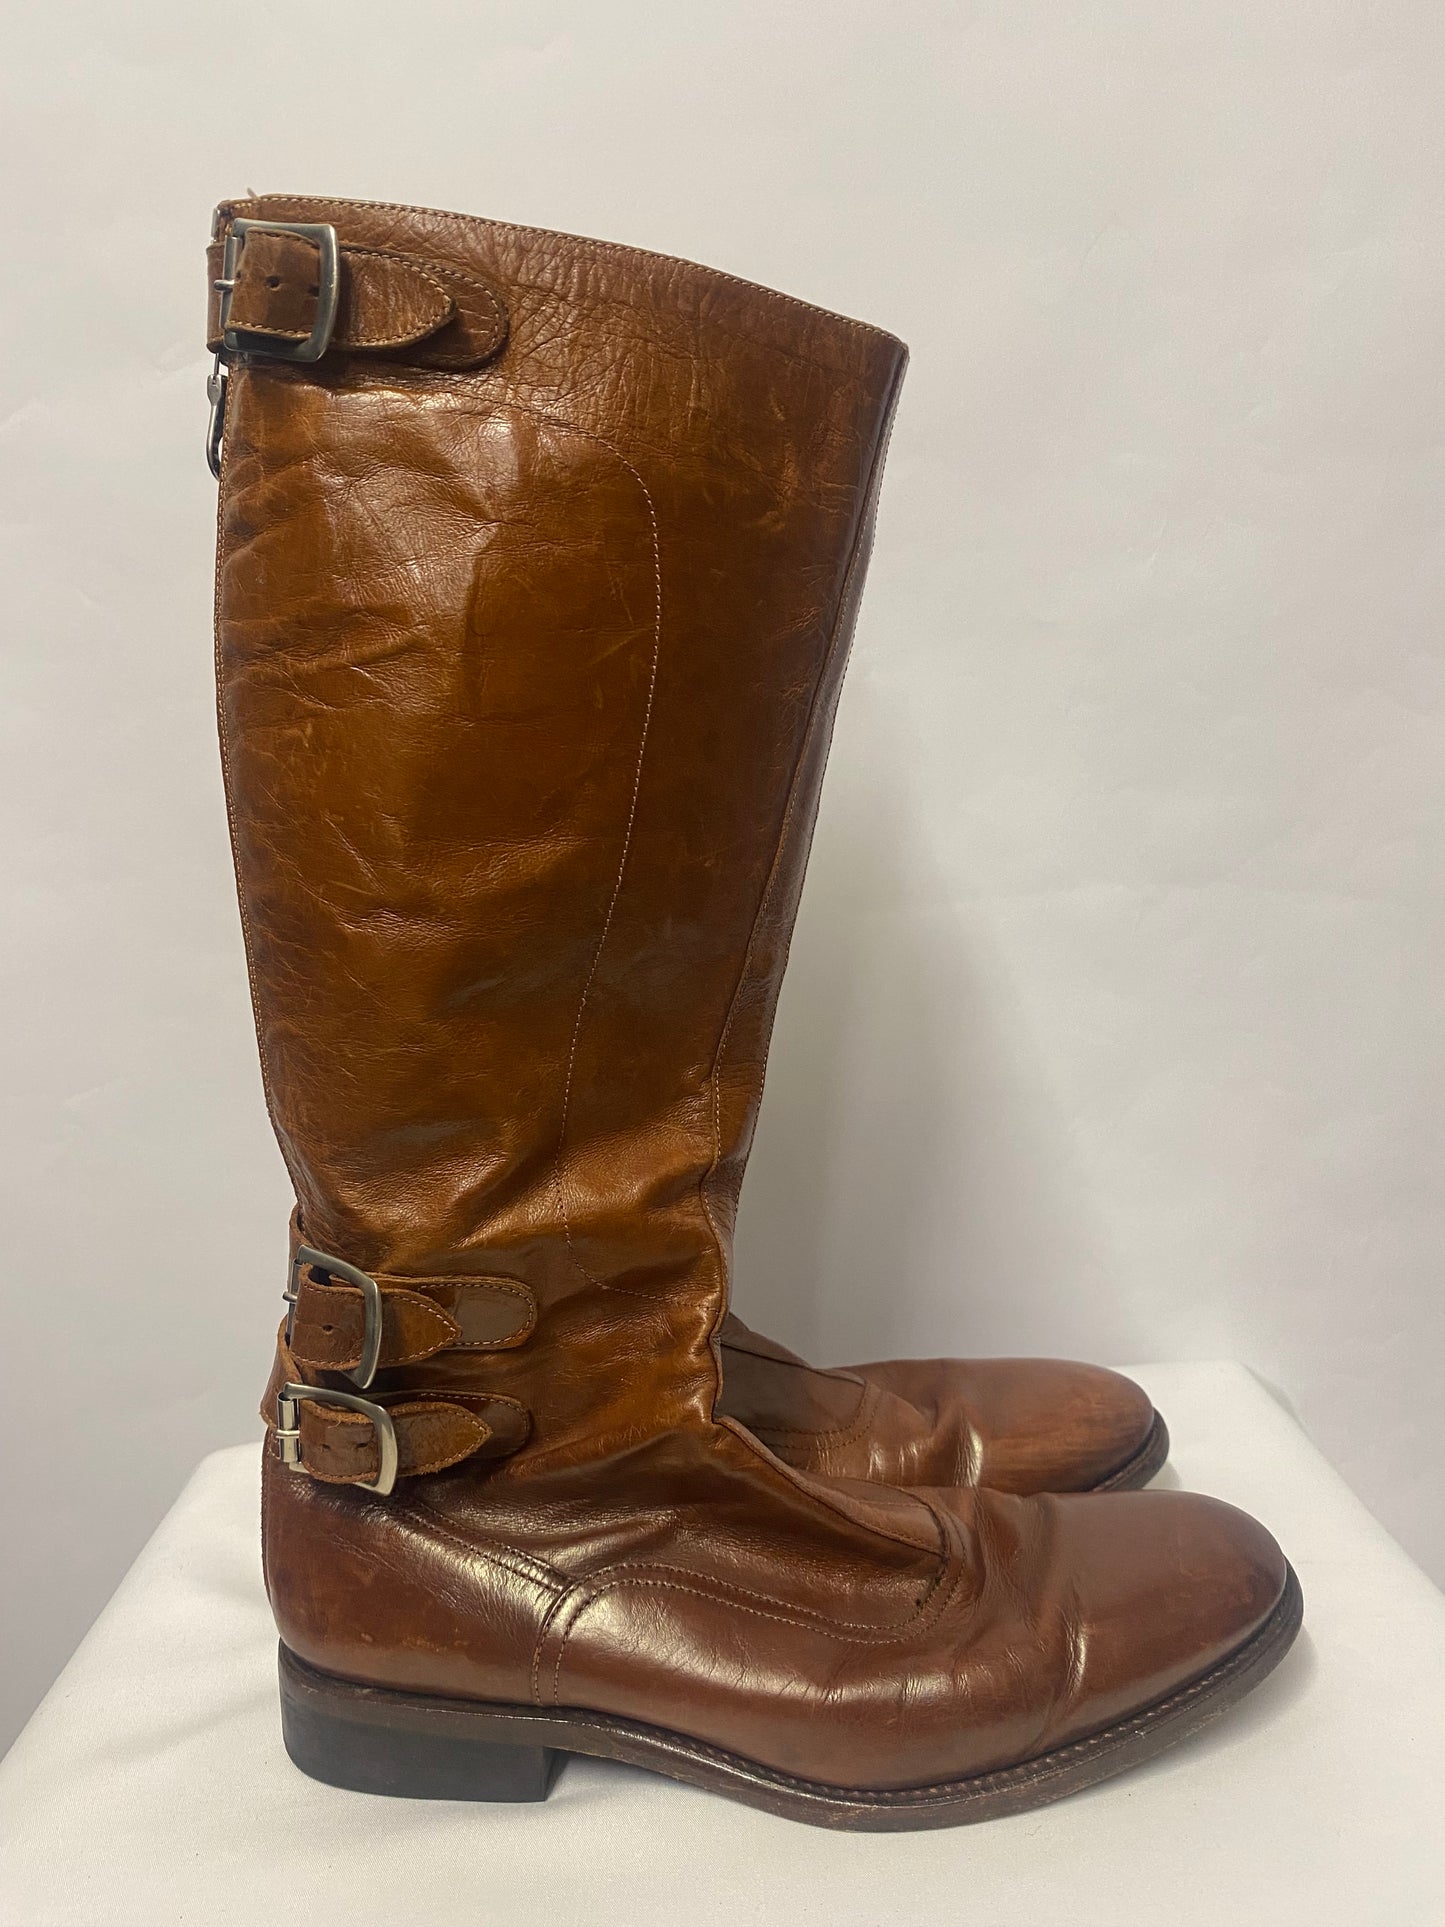 Paul Smith 'men only' Range Women's Brown Leather Calf Length Boots 5.5